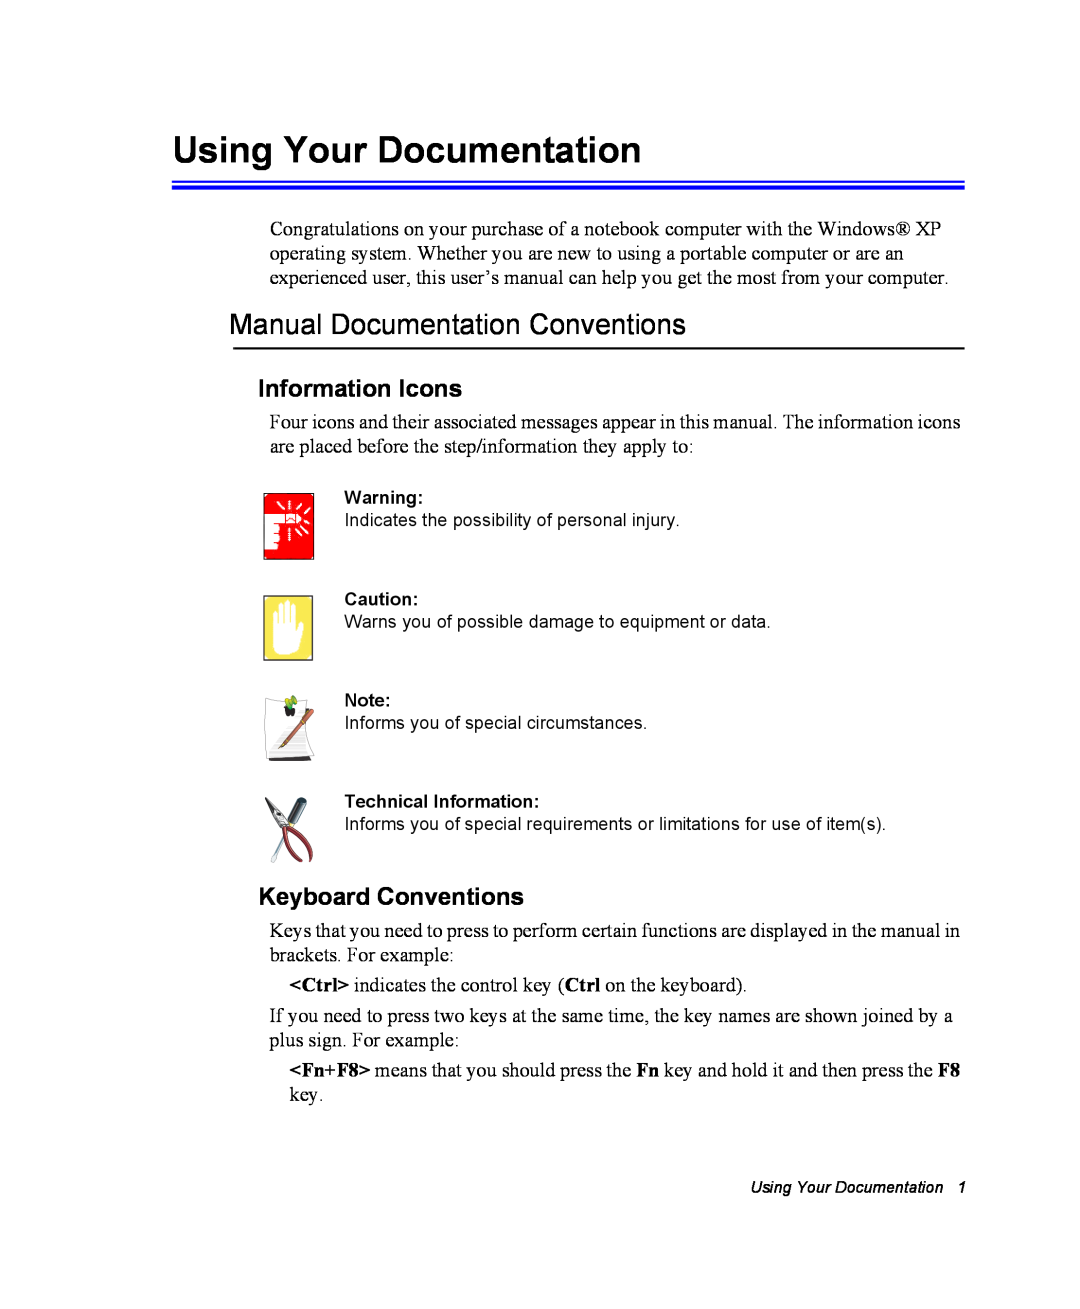 Samsung NM40PRDV03/SEF Using Your Documentation, Manual Documentation Conventions, Information Icons, Keyboard Conventions 